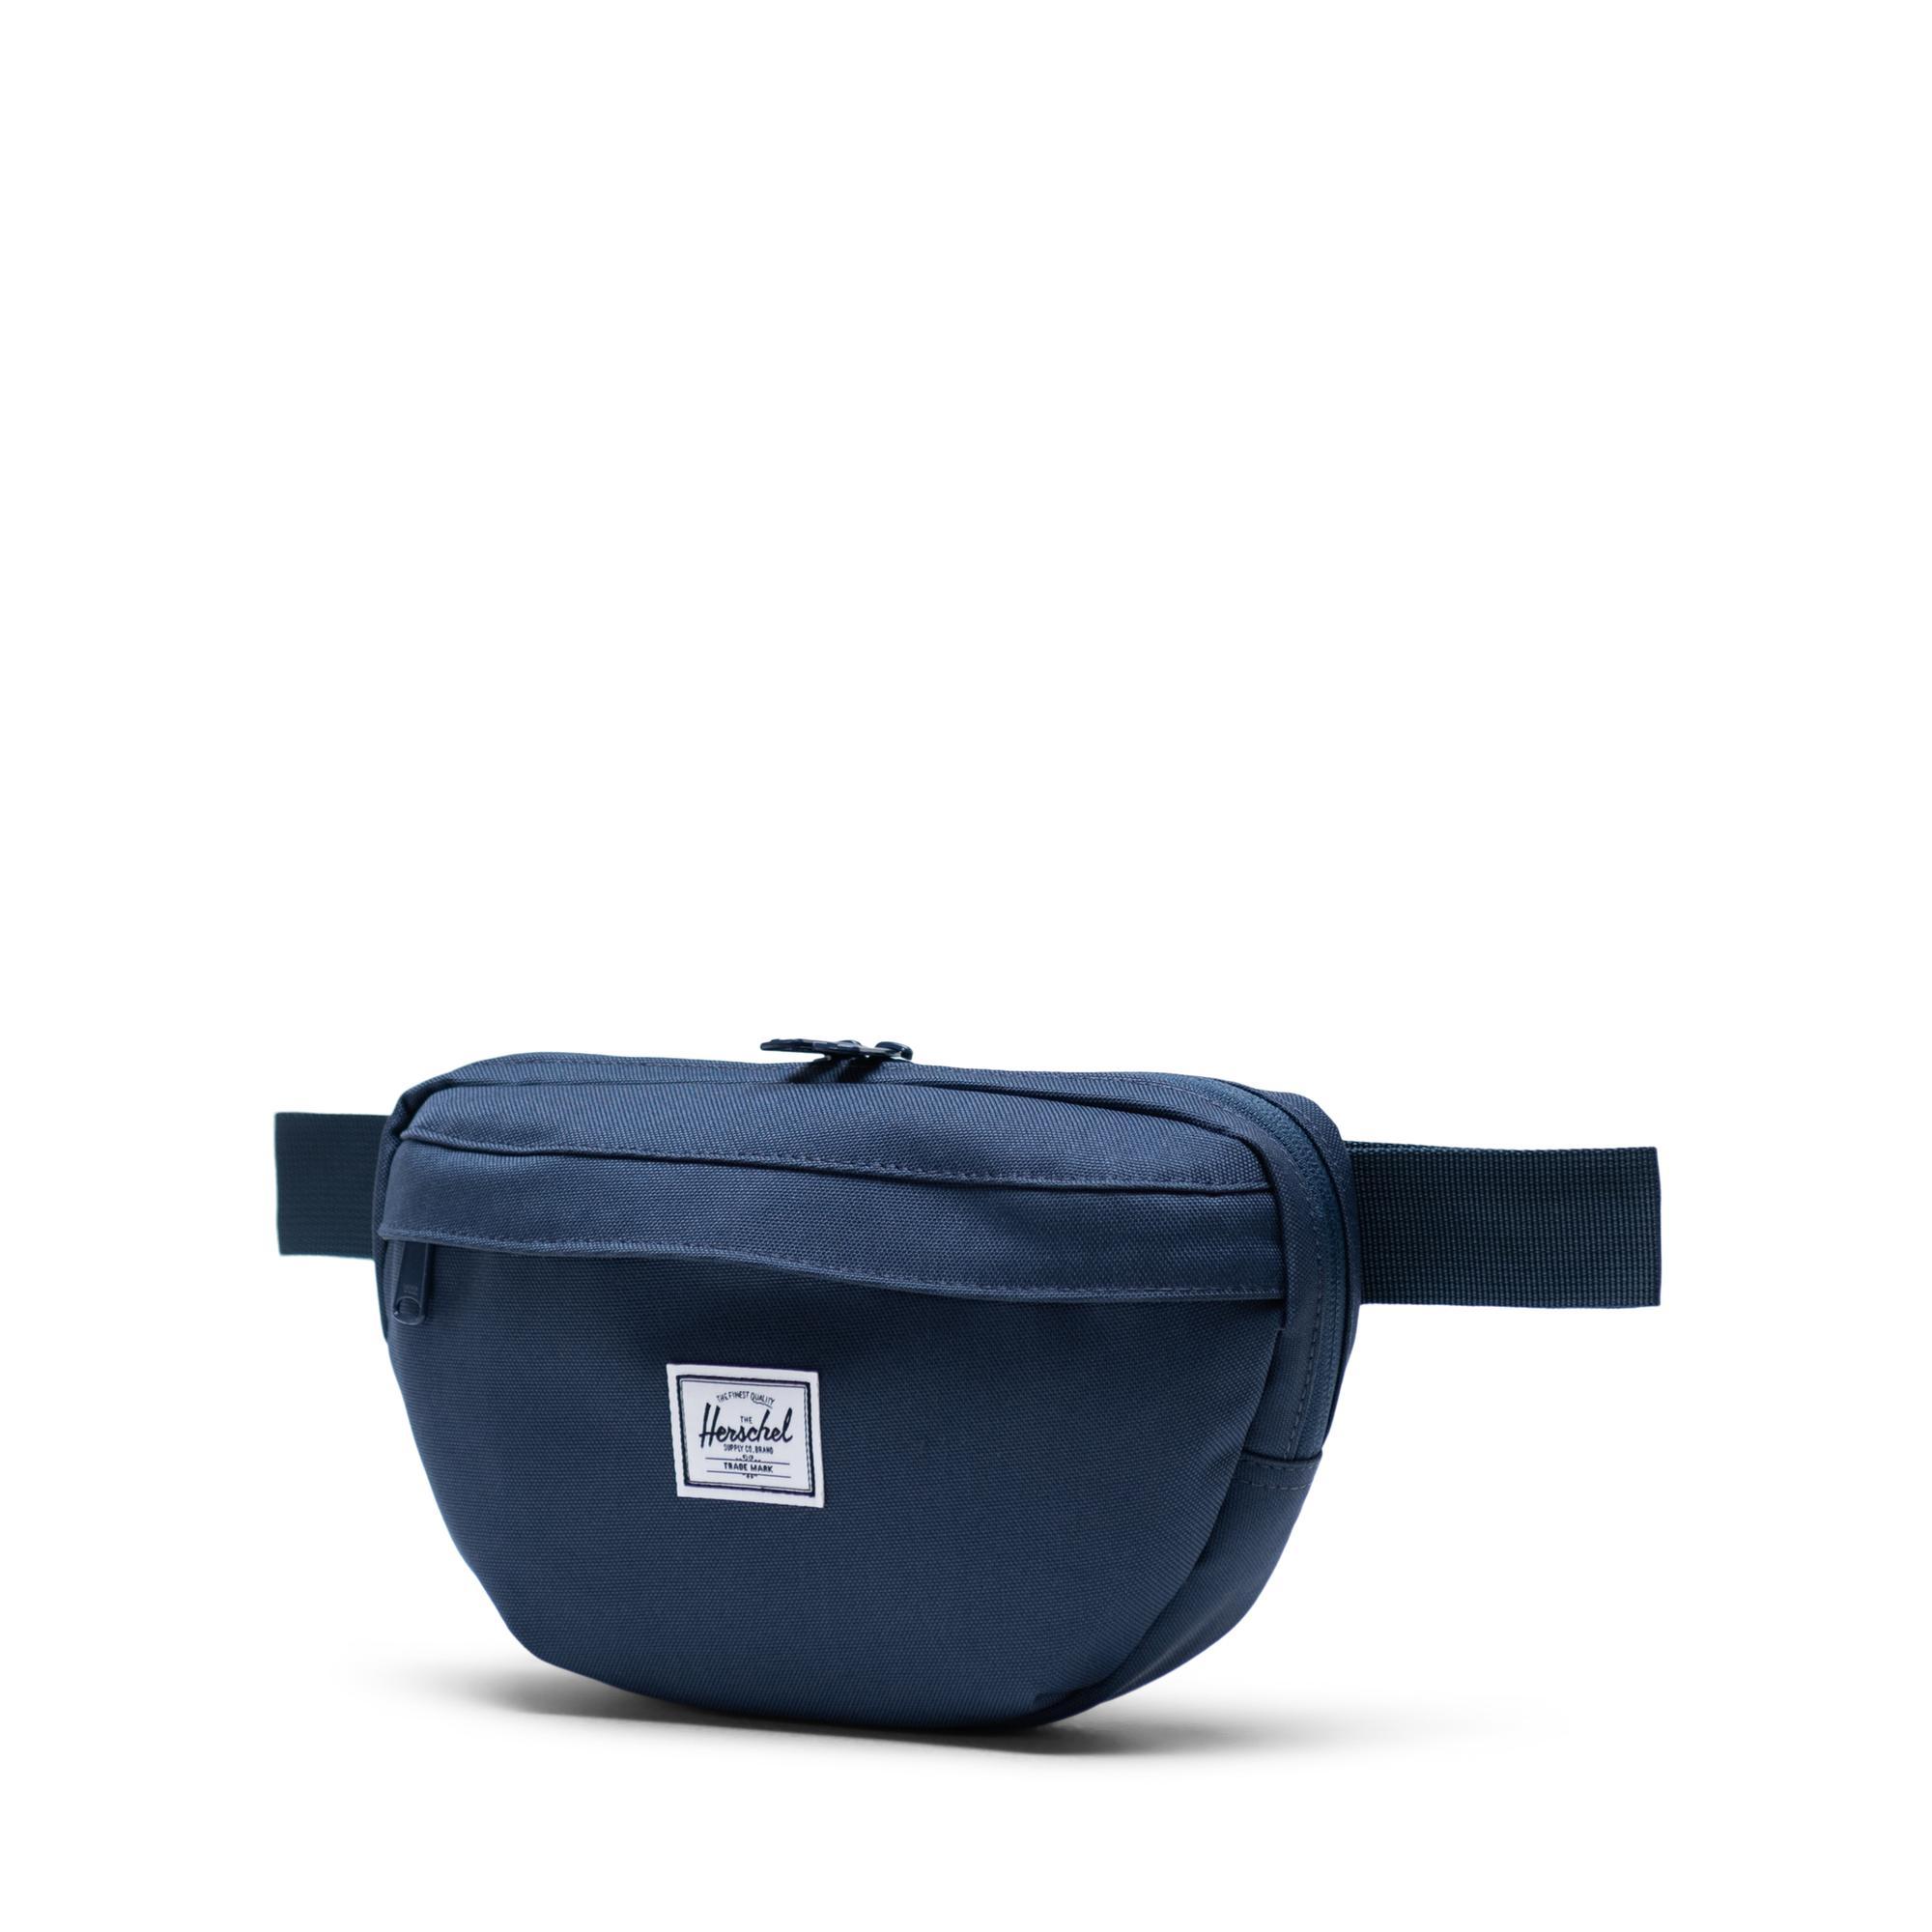 Herschel Supply Co. Synthetic Nineteen Hip Pack in Navy (Blue) - Lyst